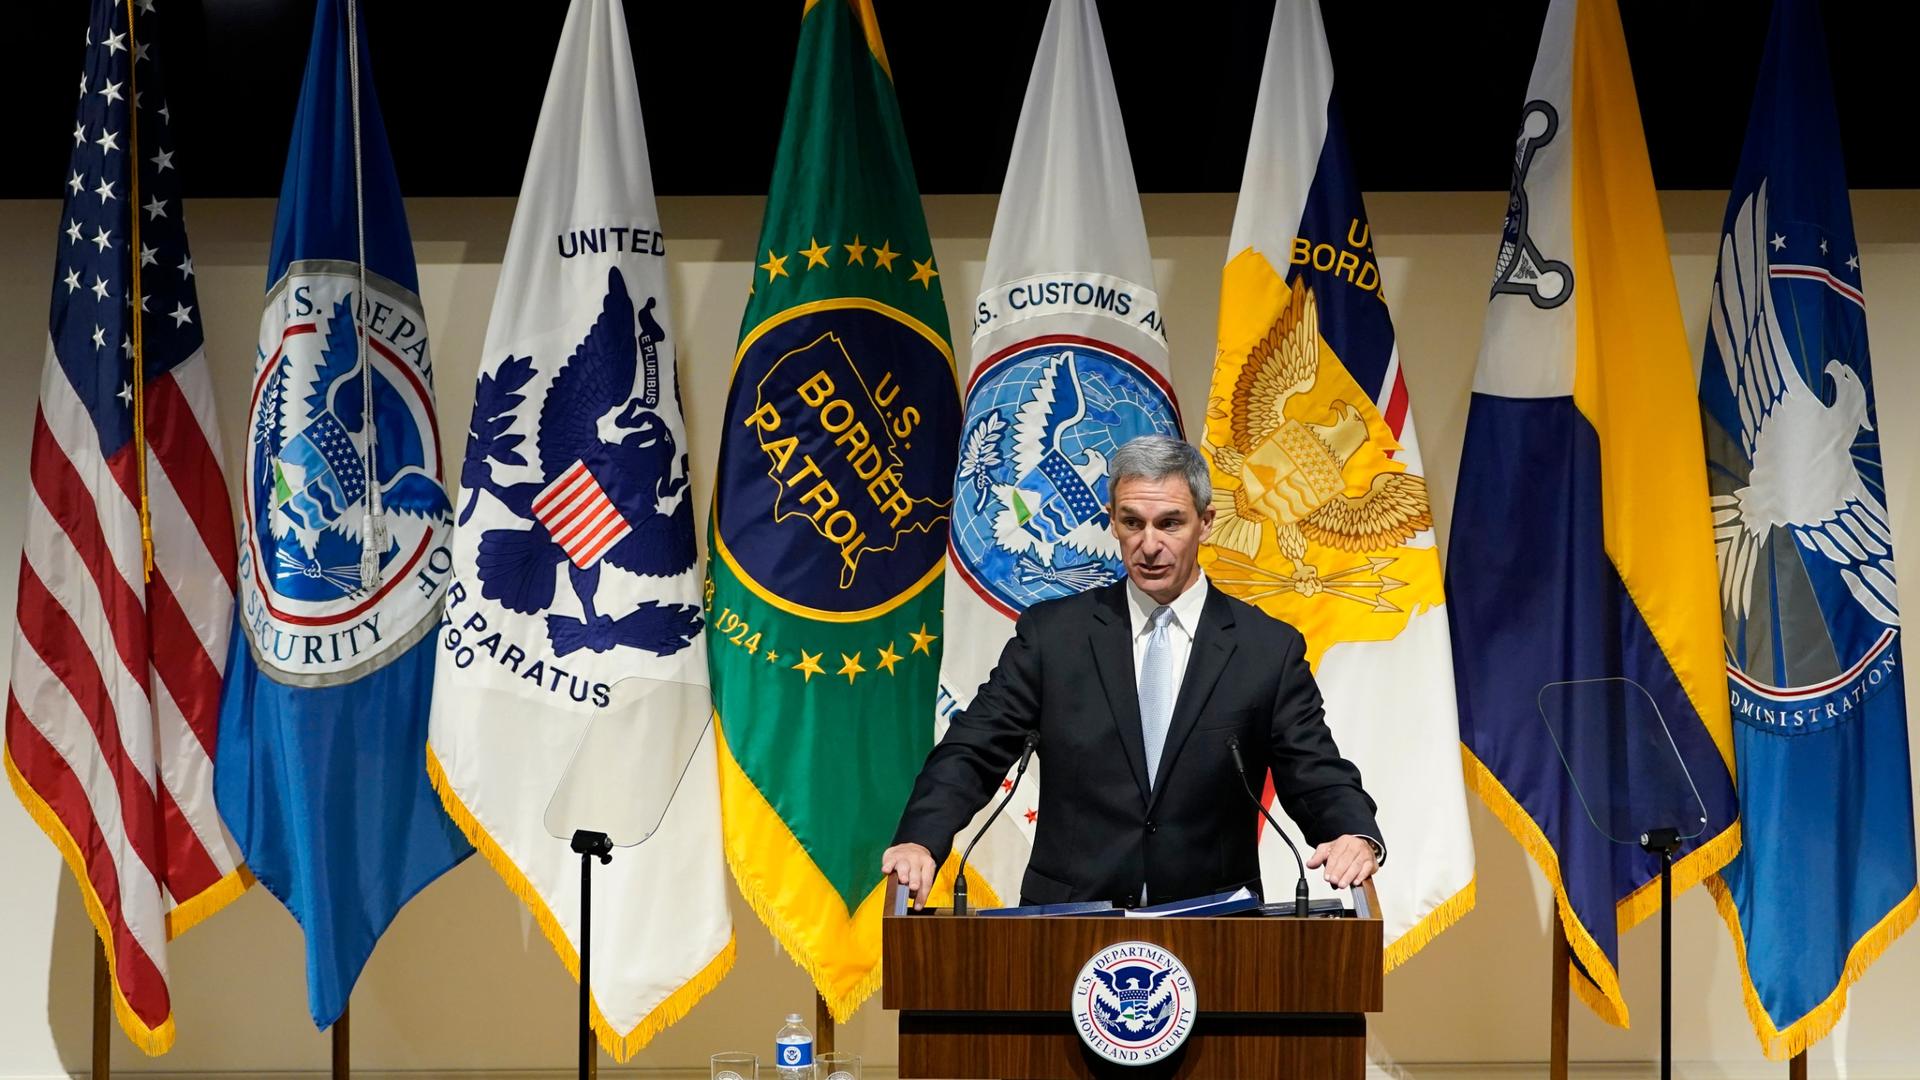 Department of Homeland Security acting Deputy Secretary Ken Cuccinelli speaks during an event at DHS headquarters in Washington, Sept. 9, 2020.